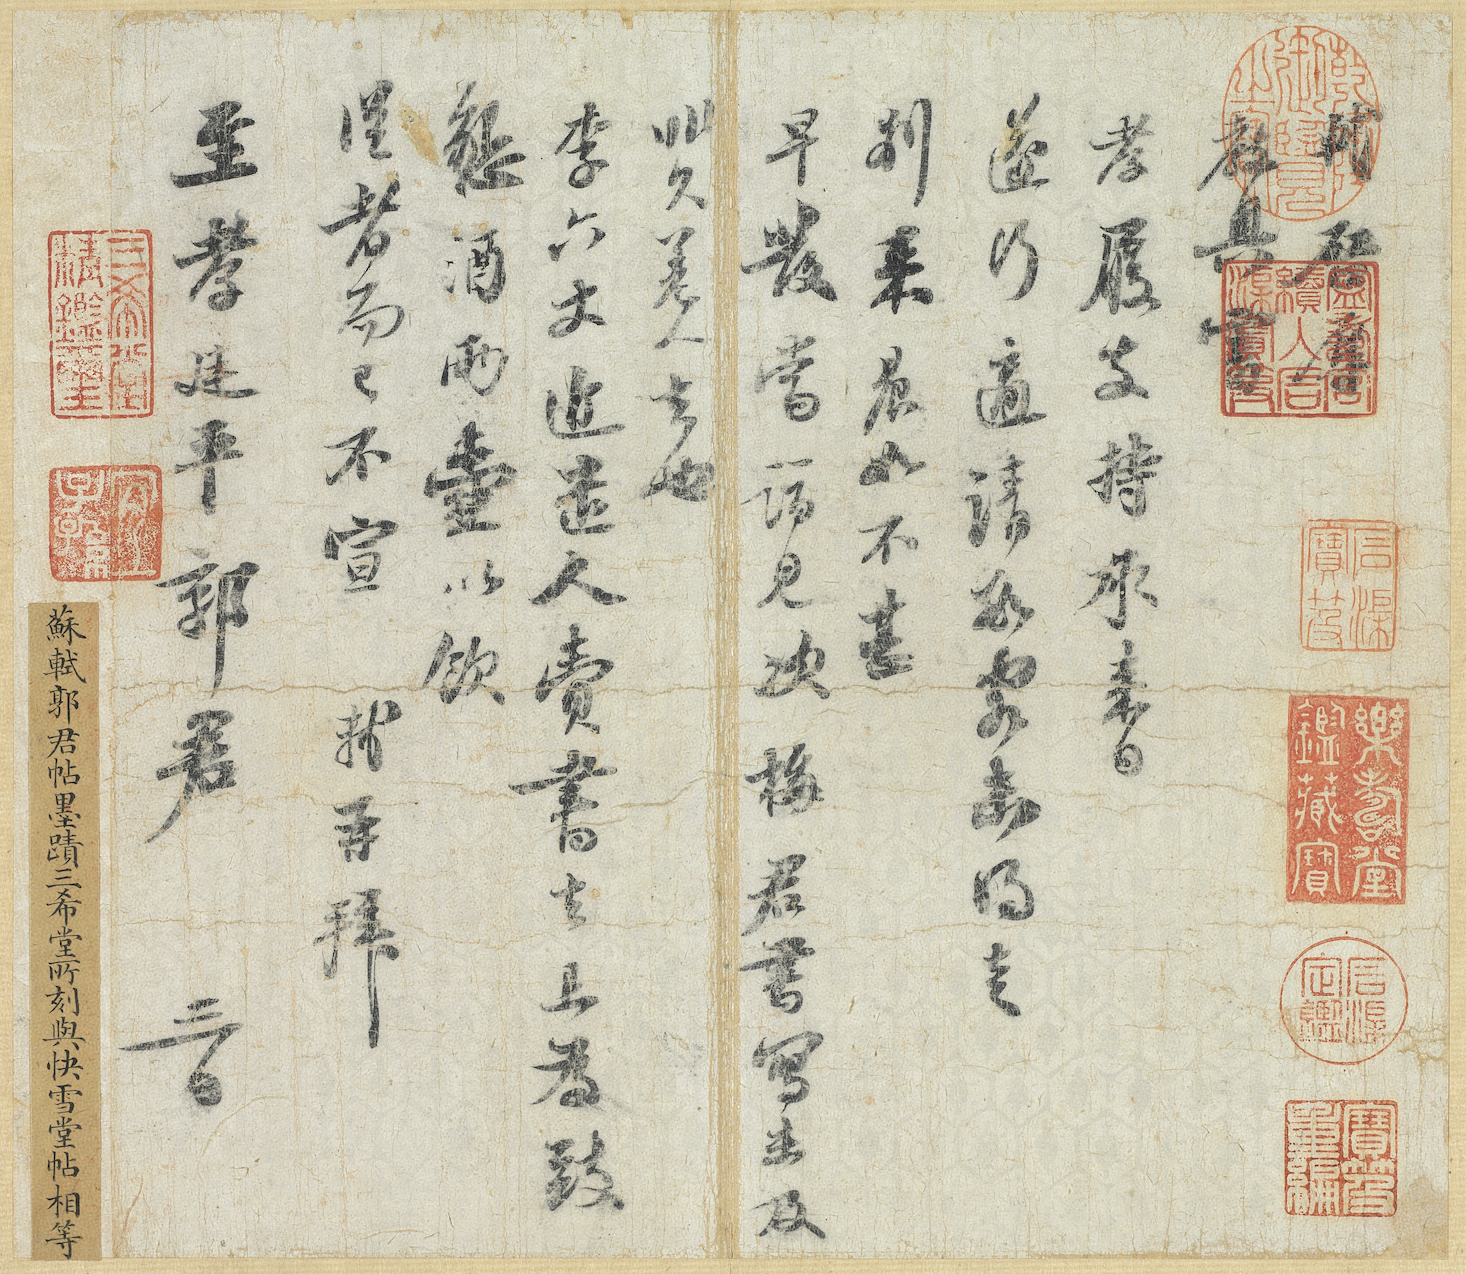 Letter to Filial Gentleman Guo Tingping